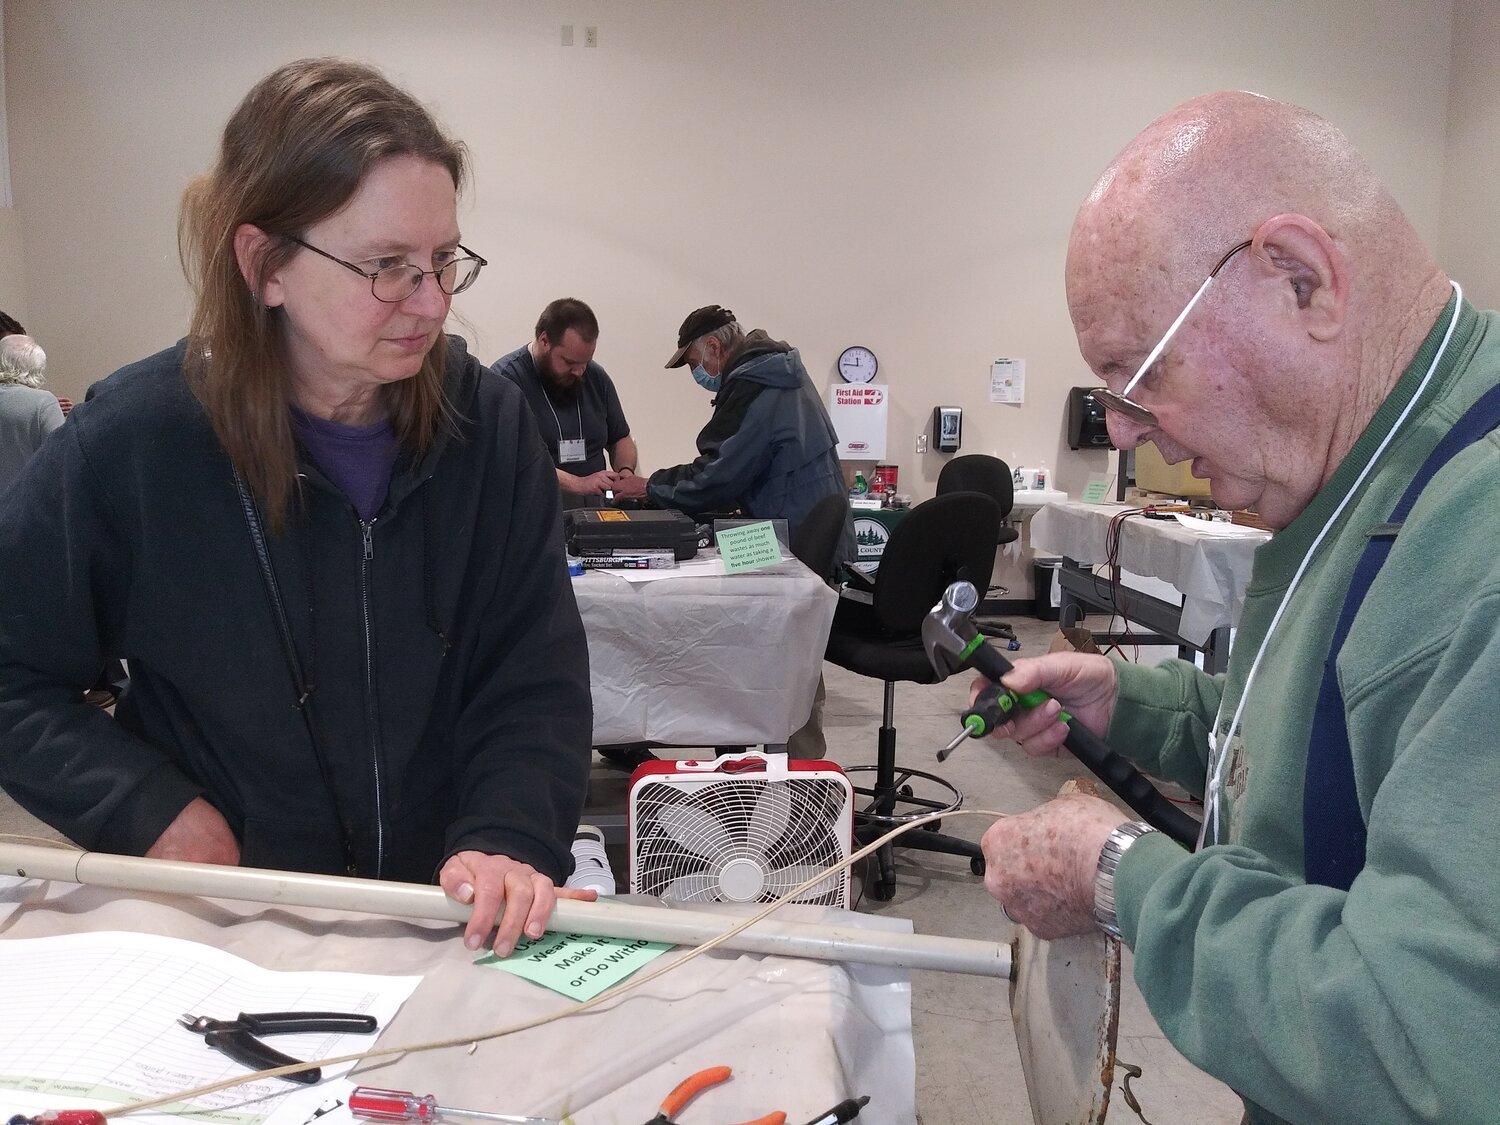 The Repair and Sustainability Fair  returns this Saturday to Centralia College and will run from 10 a.m. to 2 p.m. The event includes classes on maintenance and volunteers who can help fix household items, such as a ripped pair of jeans or a broken vacuum. These photos are from a previous fair.